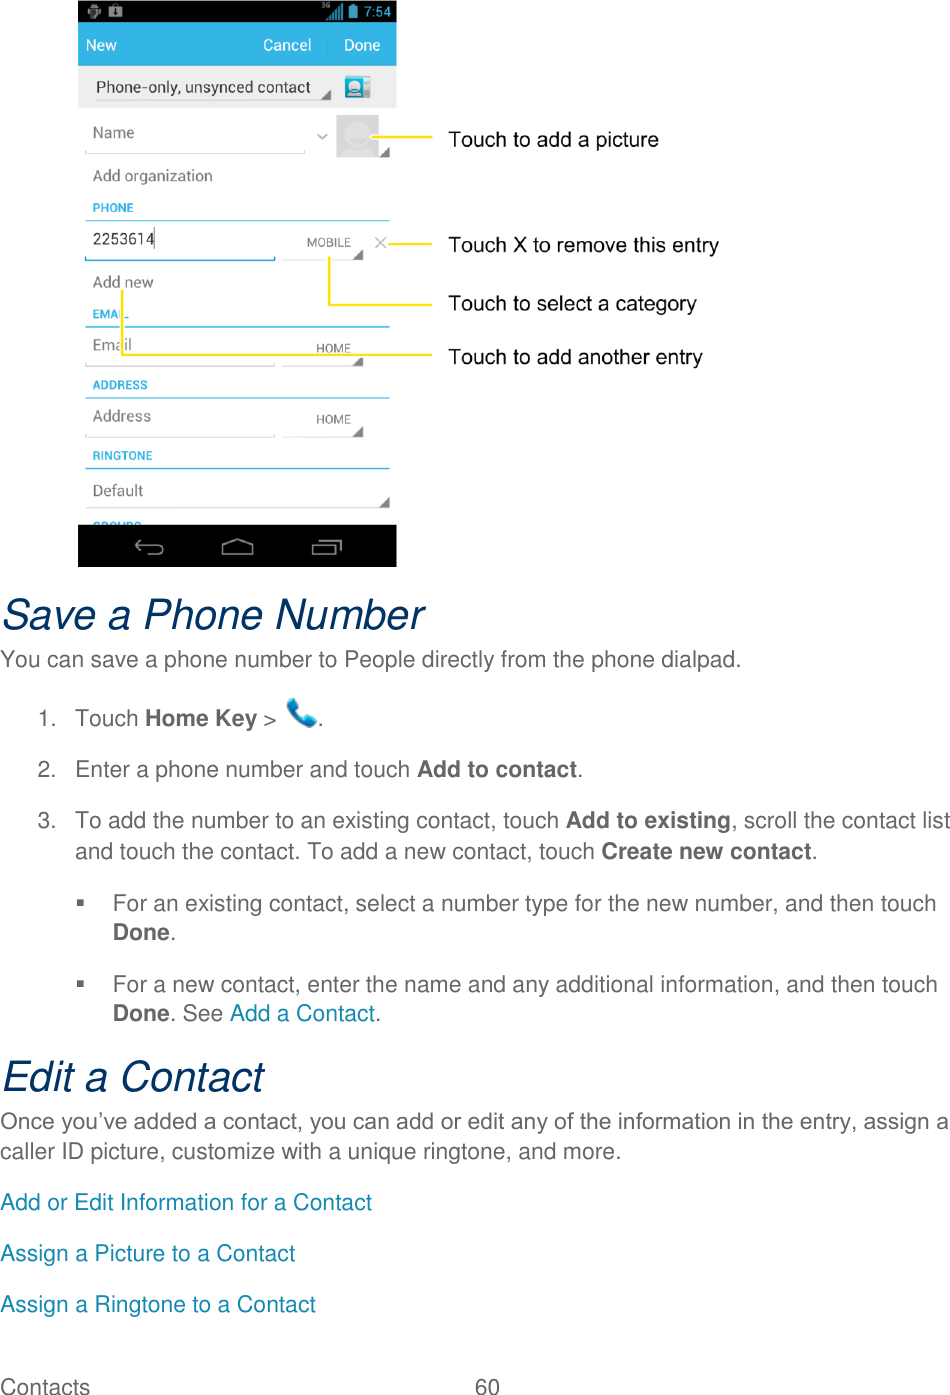 Contacts  60    Save a Phone Number You can save a phone number to People directly from the phone dialpad. 1.  Touch Home Key &gt;  . 2.  Enter a phone number and touch Add to contact. 3.  To add the number to an existing contact, touch Add to existing, scroll the contact list and touch the contact. To add a new contact, touch Create new contact.   For an existing contact, select a number type for the new number, and then touch Done.   For a new contact, enter the name and any additional information, and then touch Done. See Add a Contact. Edit a Contact Once you‟ve added a contact, you can add or edit any of the information in the entry, assign a caller ID picture, customize with a unique ringtone, and more. Add or Edit Information for a Contact Assign a Picture to a Contact Assign a Ringtone to a Contact 